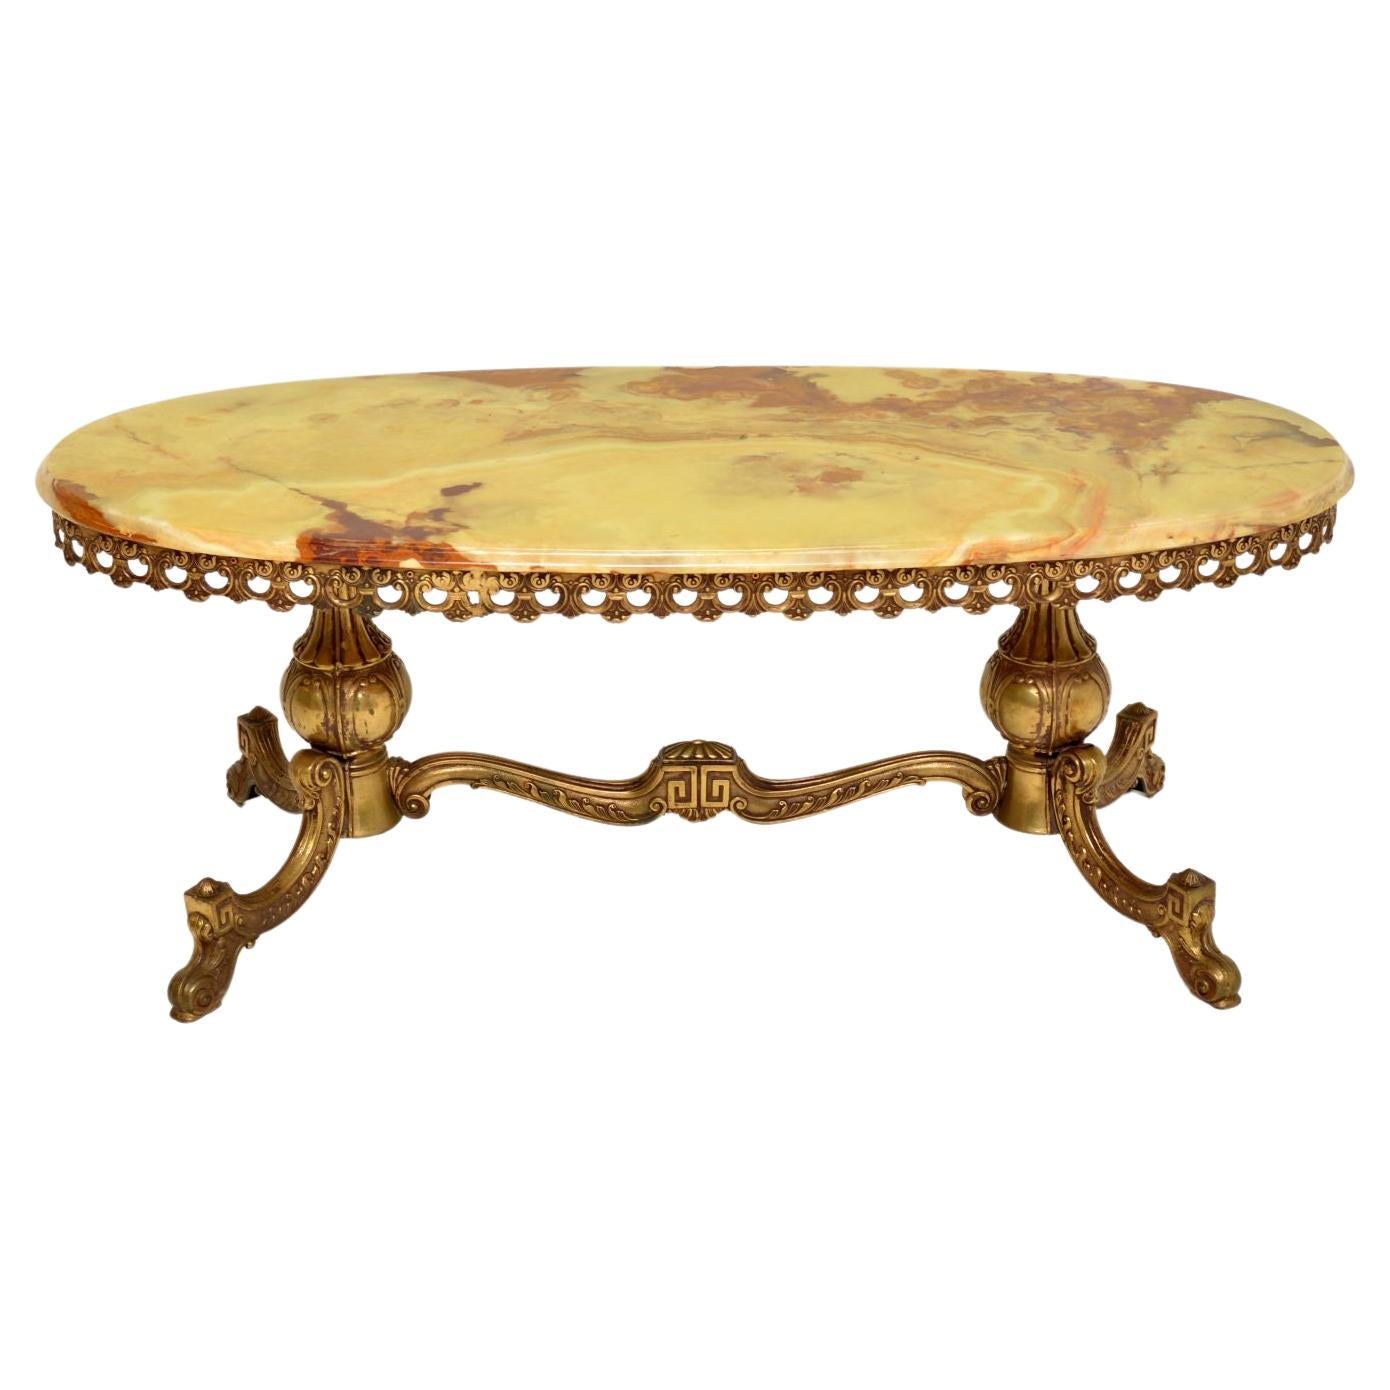 Antique French Onyx & Brass Coffee Table